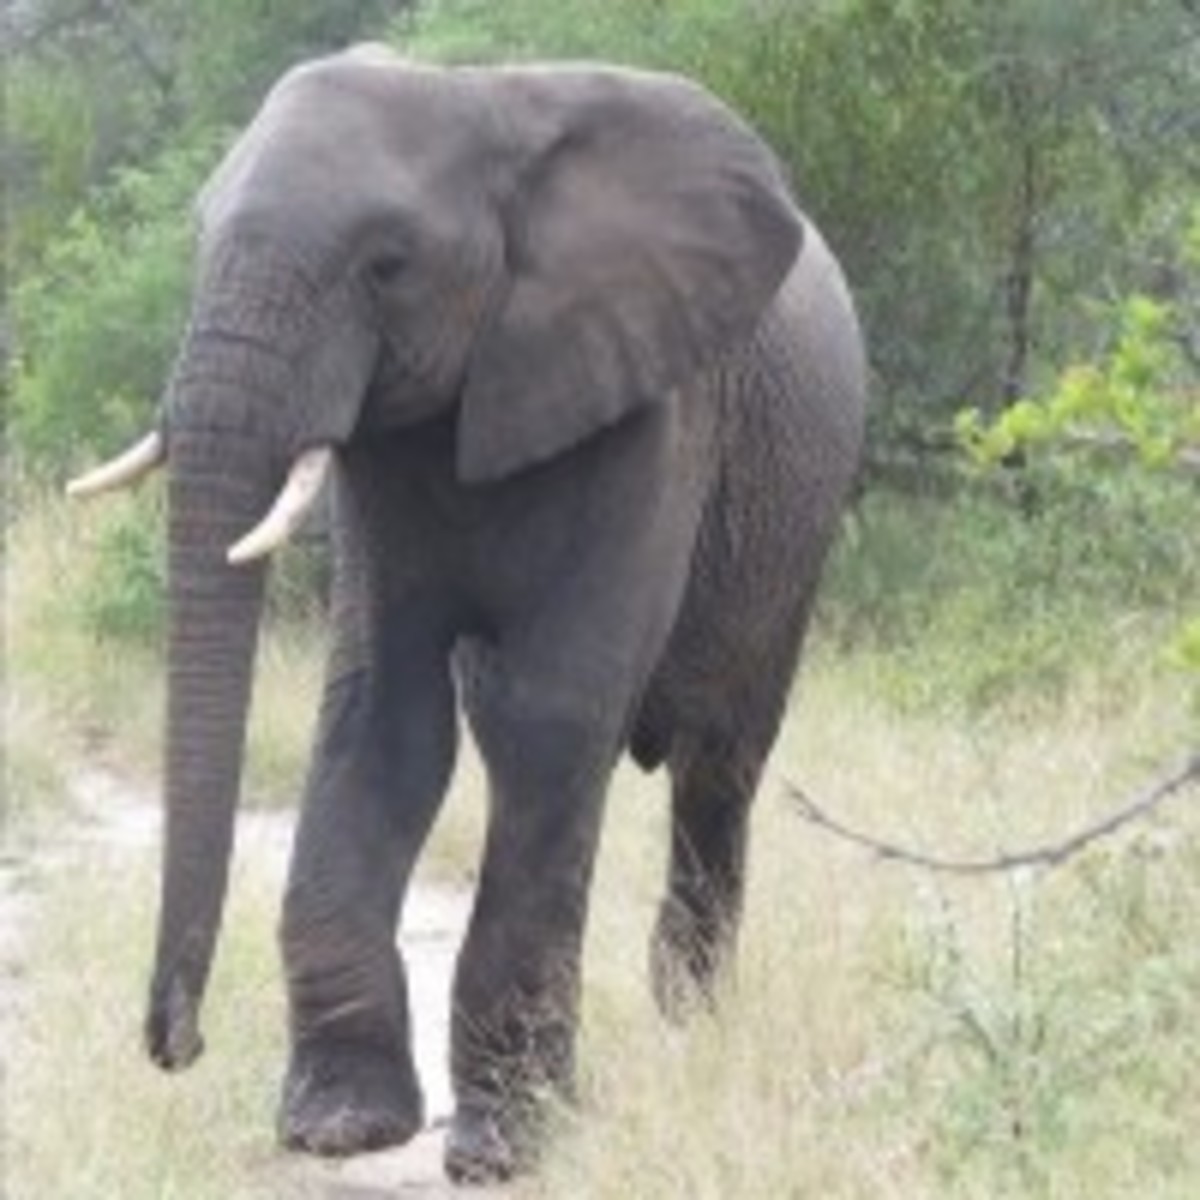 The Mighty Elephant! We Startled Her and with Ears Flared she Gave Us a Warning Scream!